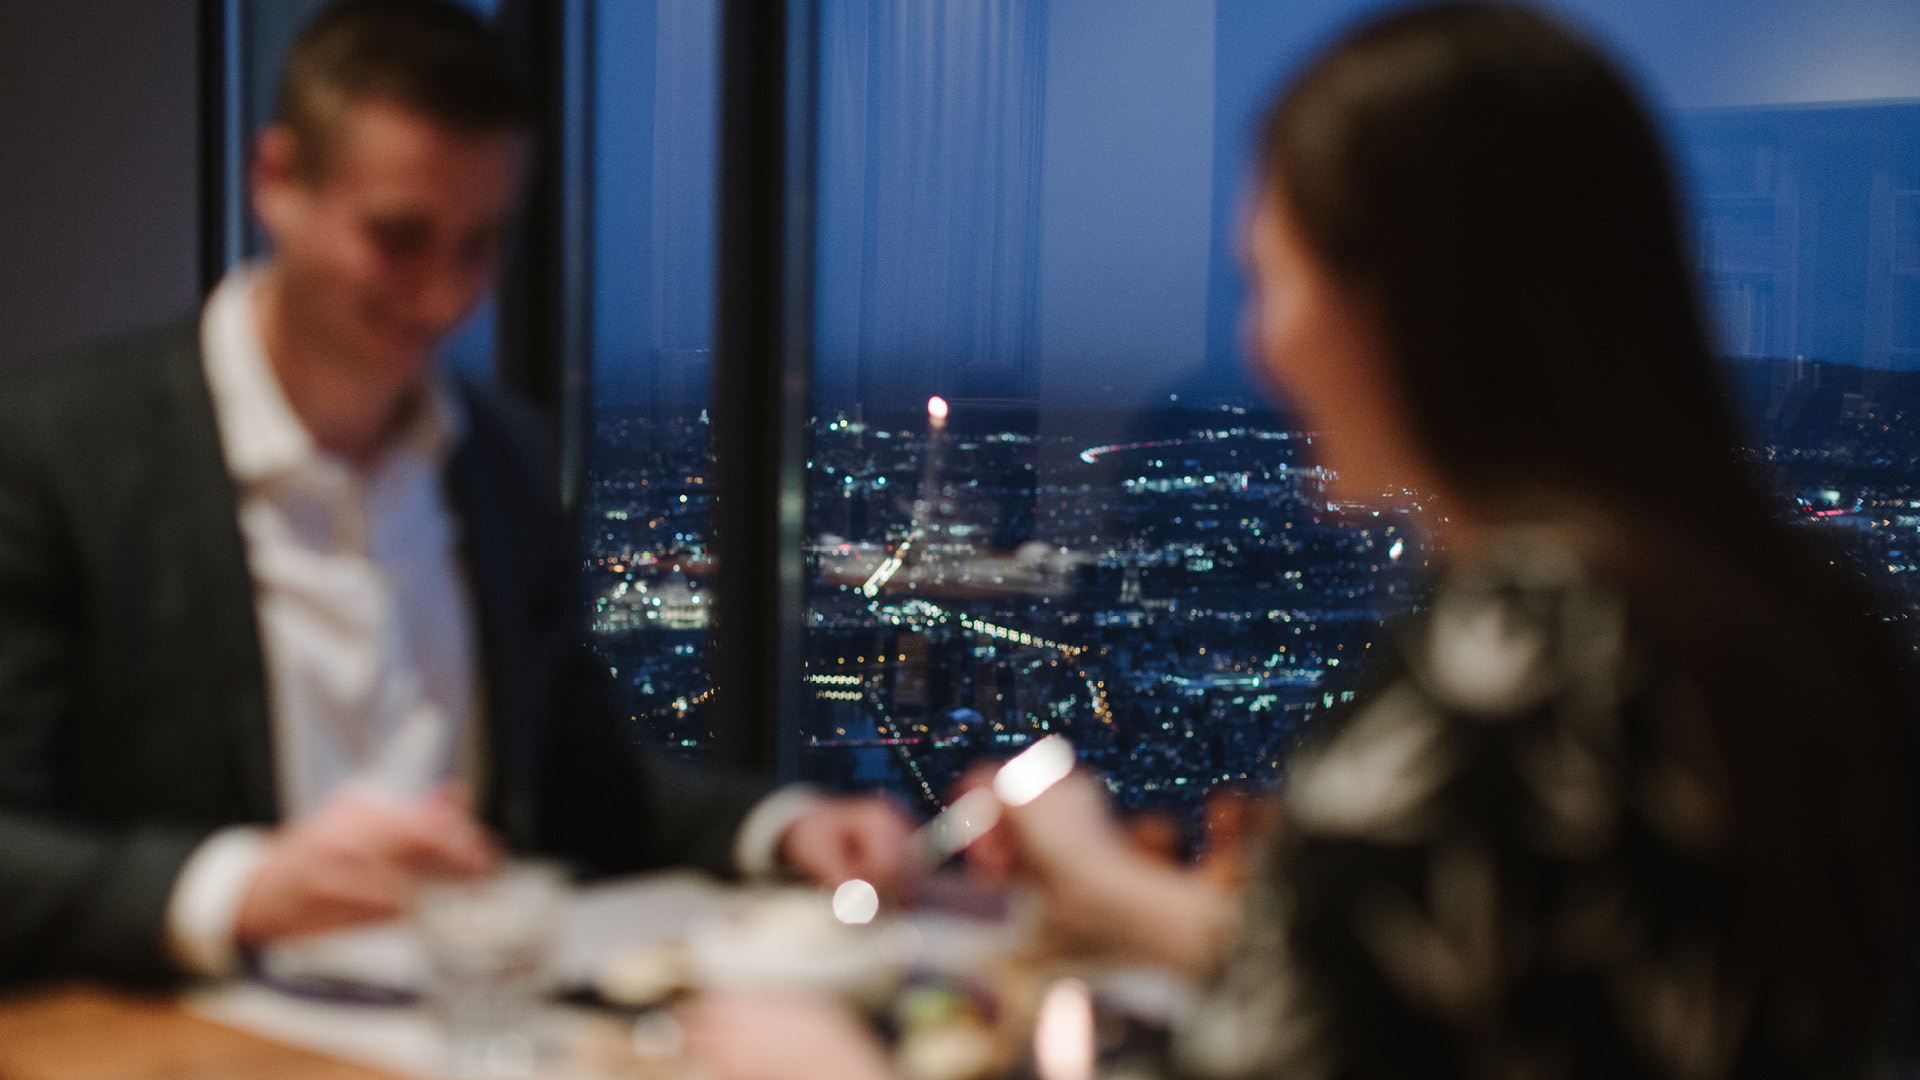 A couple enjoying dinner in a cozy atmosphere. The city lights can be seen in the background. 